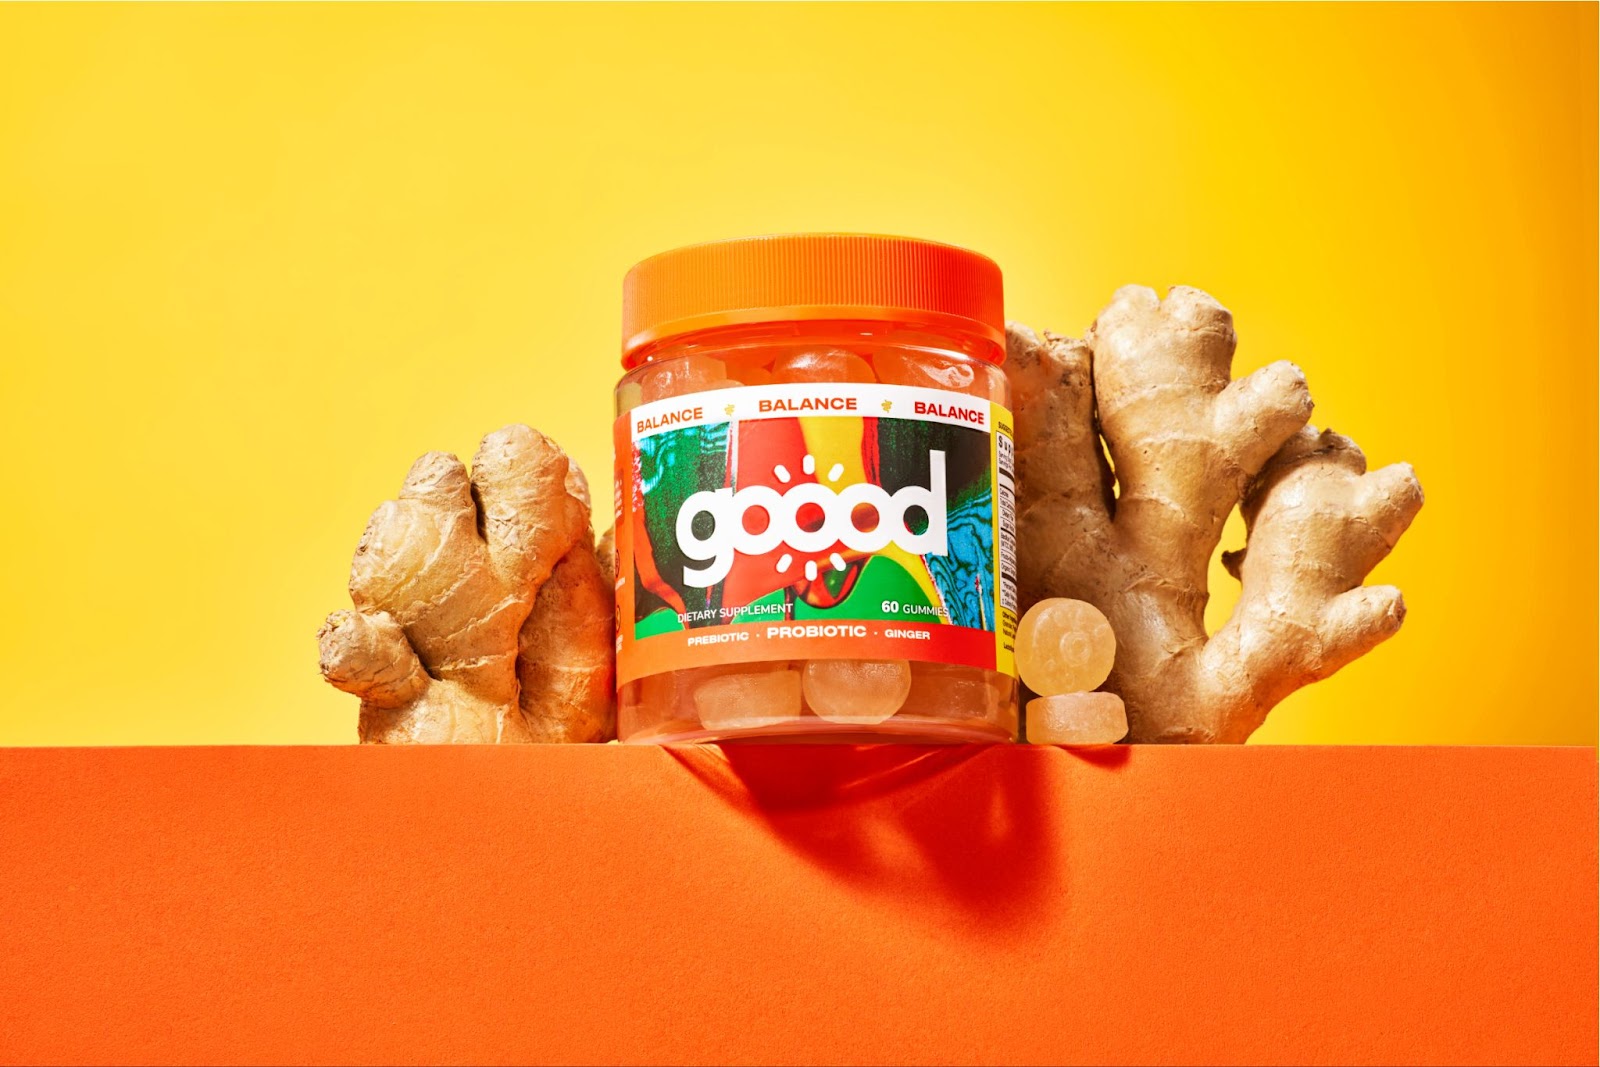 Packaging design for Goood Wellness featuring real flowers, fruits and botanicals dripping with color 